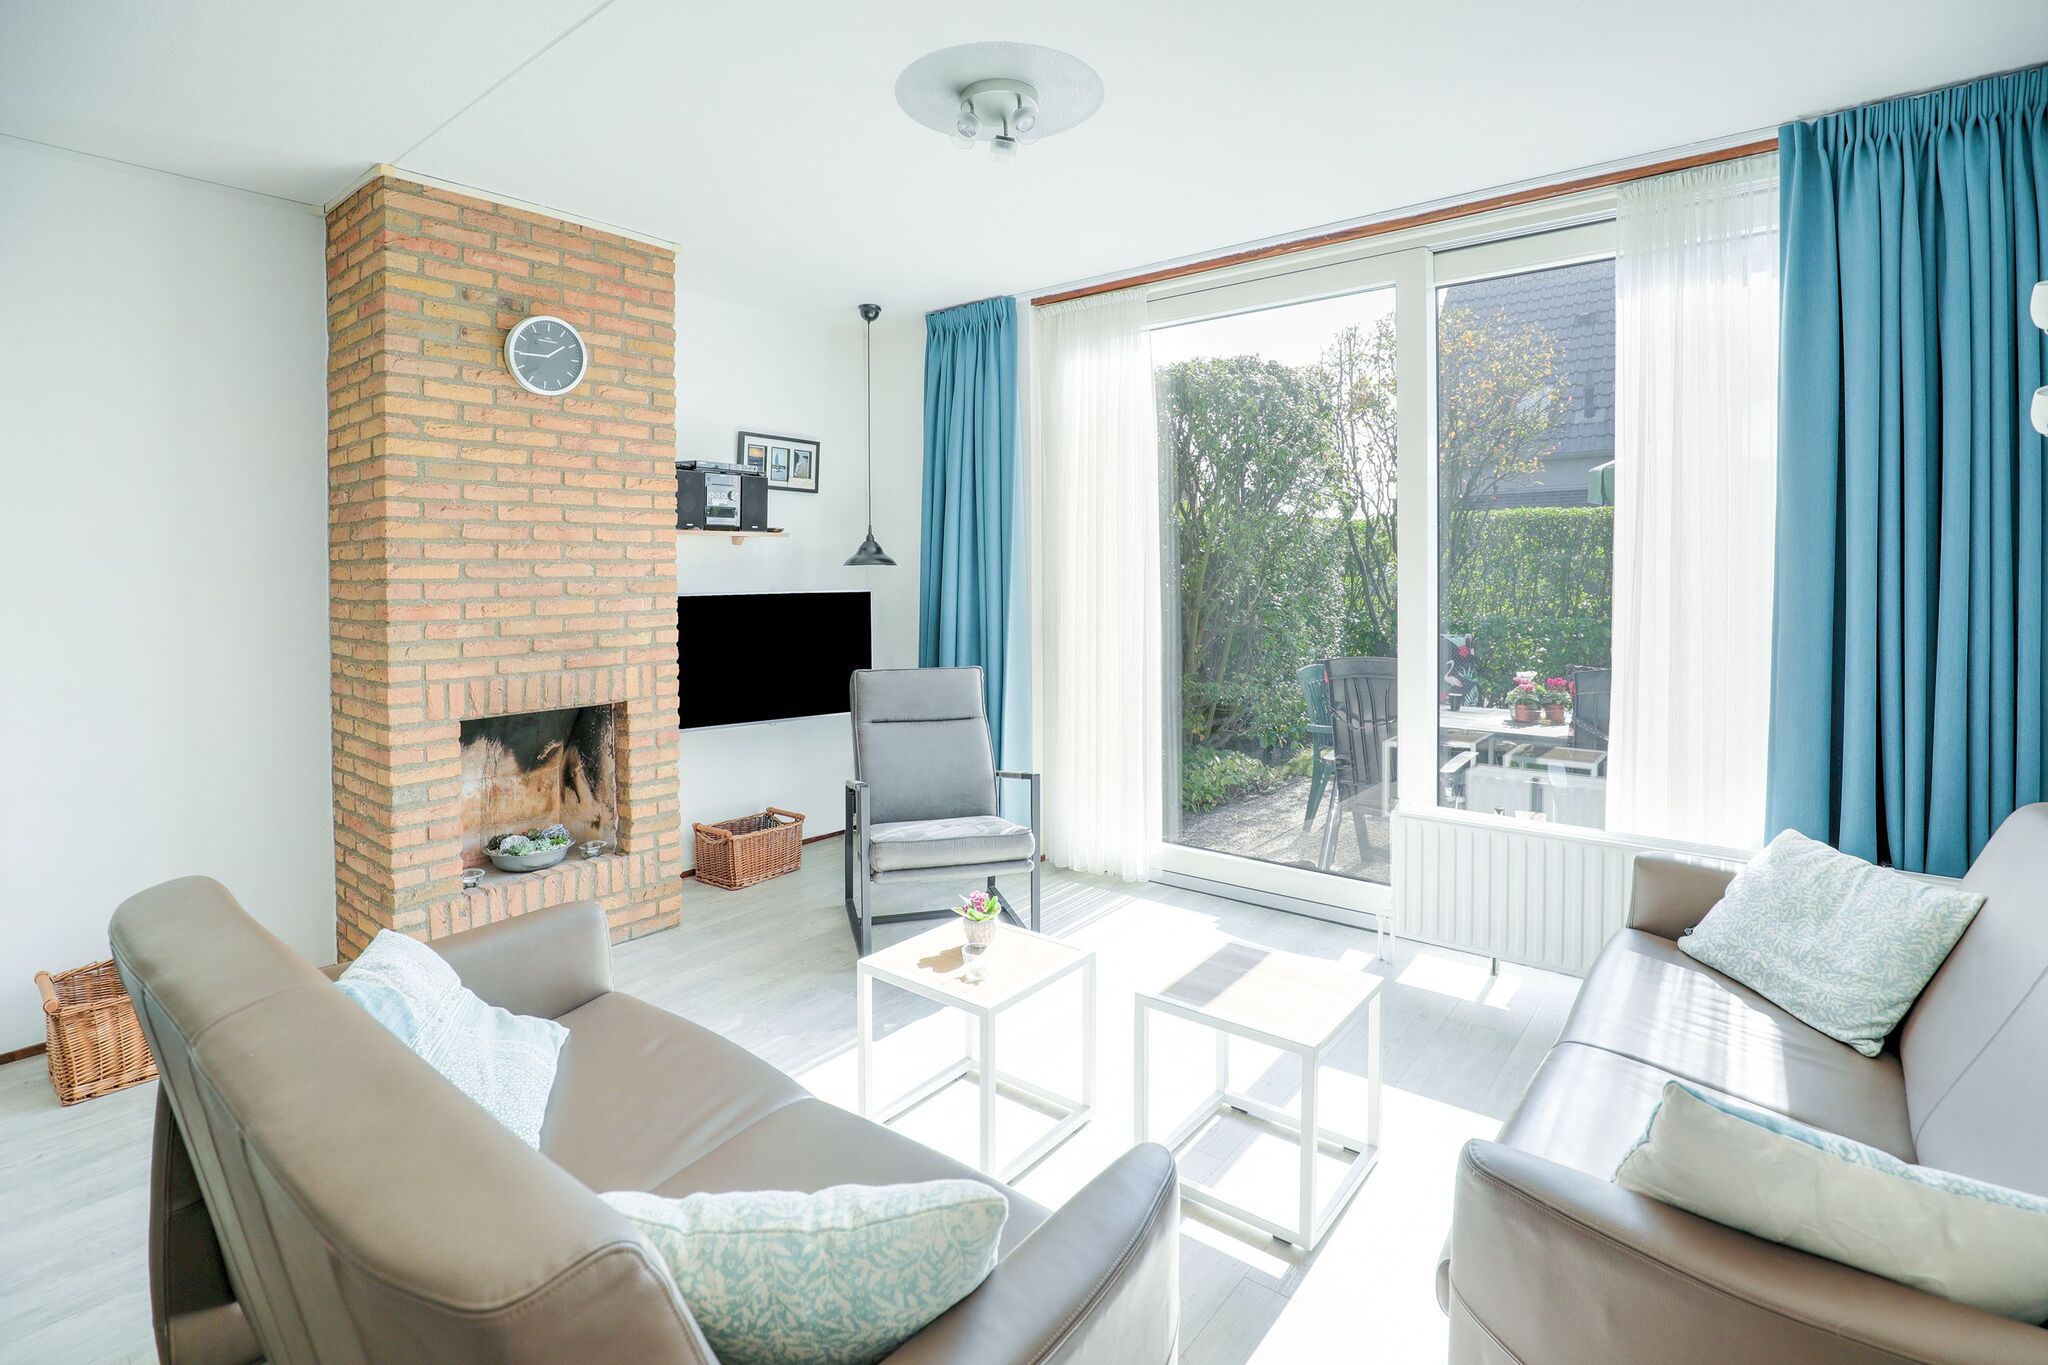 Well equipped holiday home in Nieuwvliet, just a few minutes walk from the beach